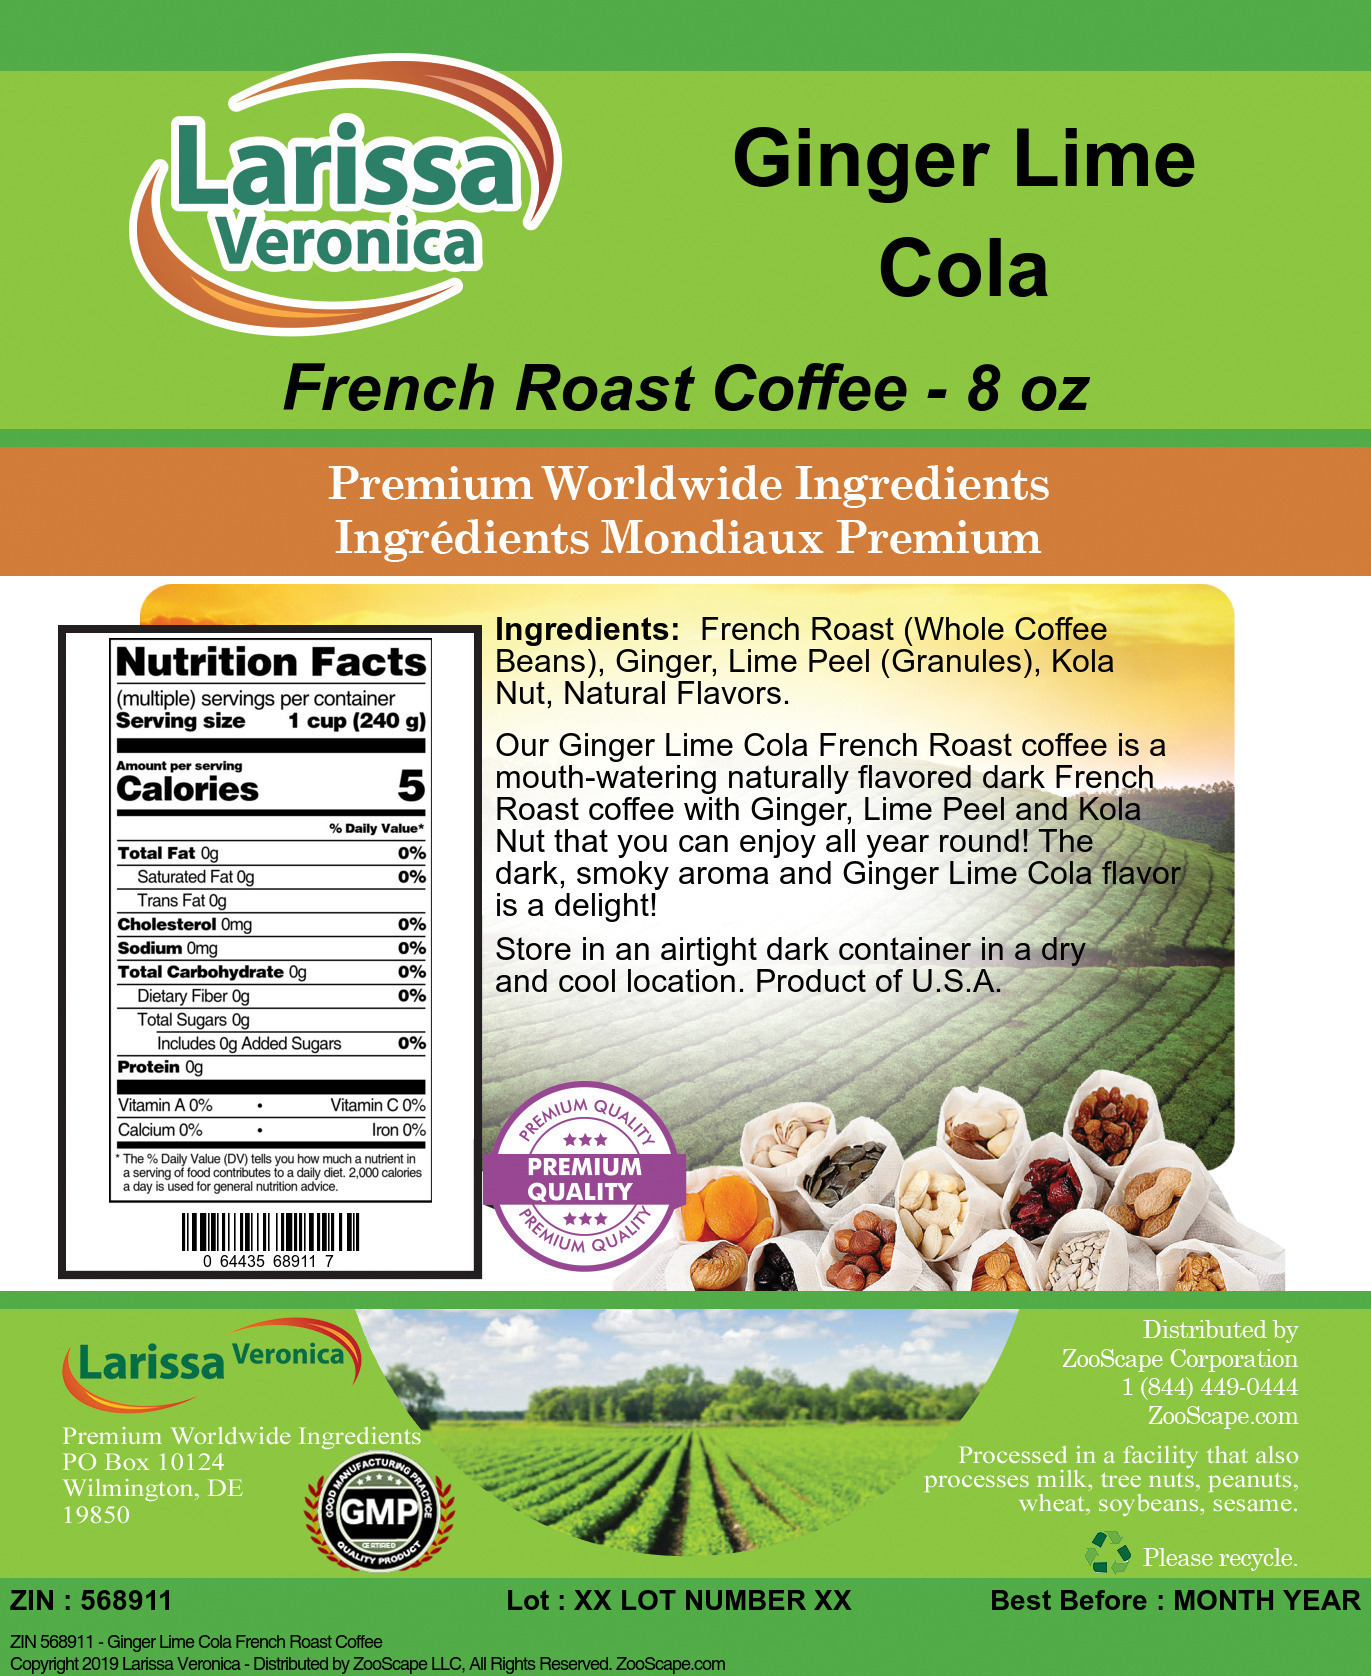 Ginger Lime Cola French Roast Coffee - Label